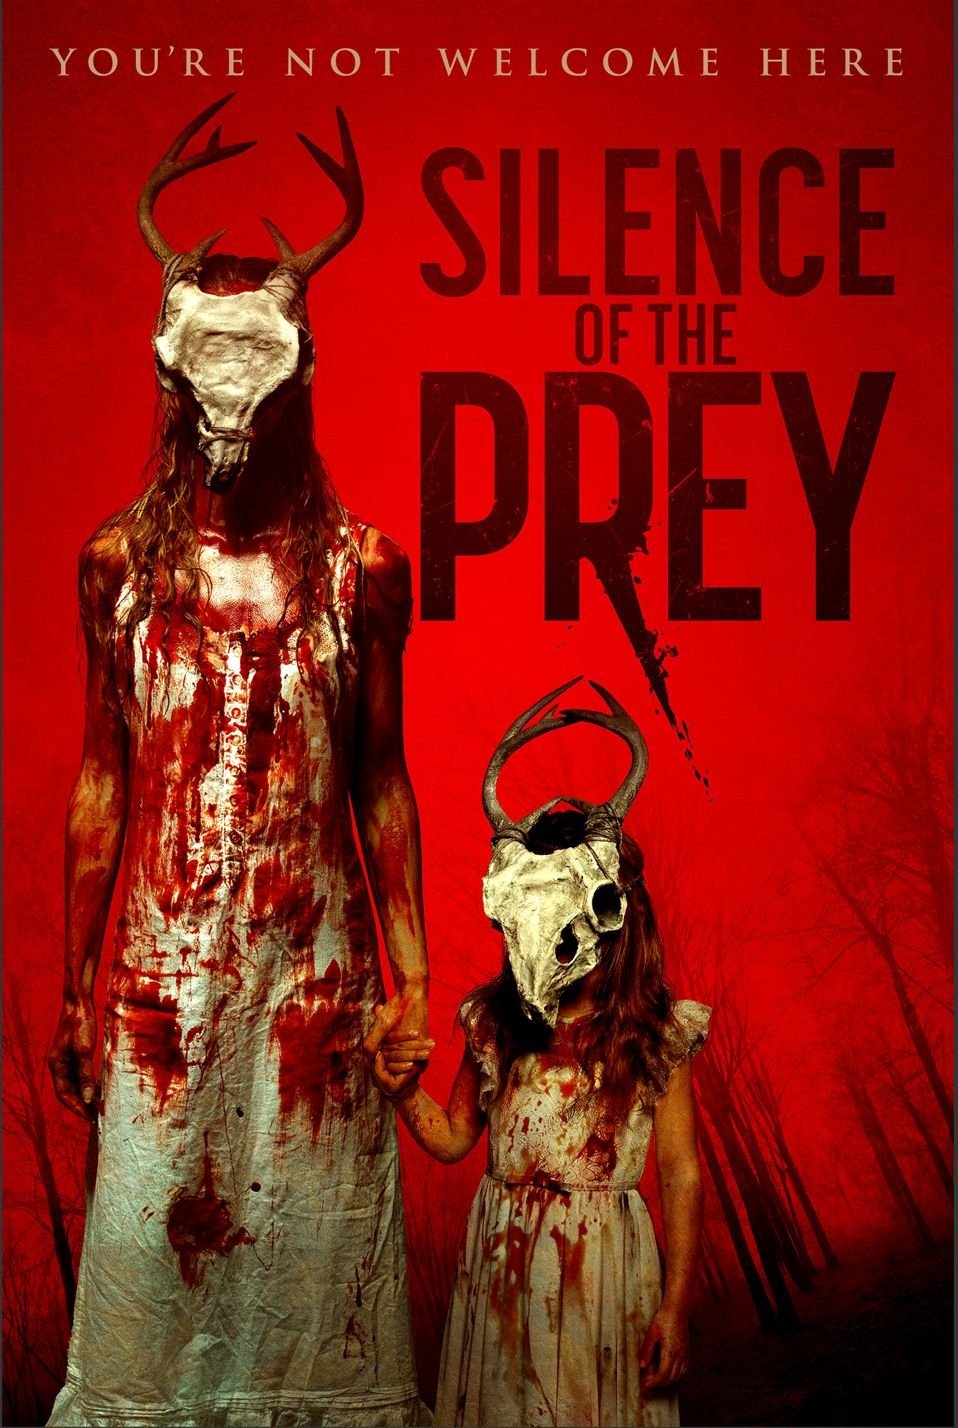 Silence+of+the+Prey+-+Poster.jpeg